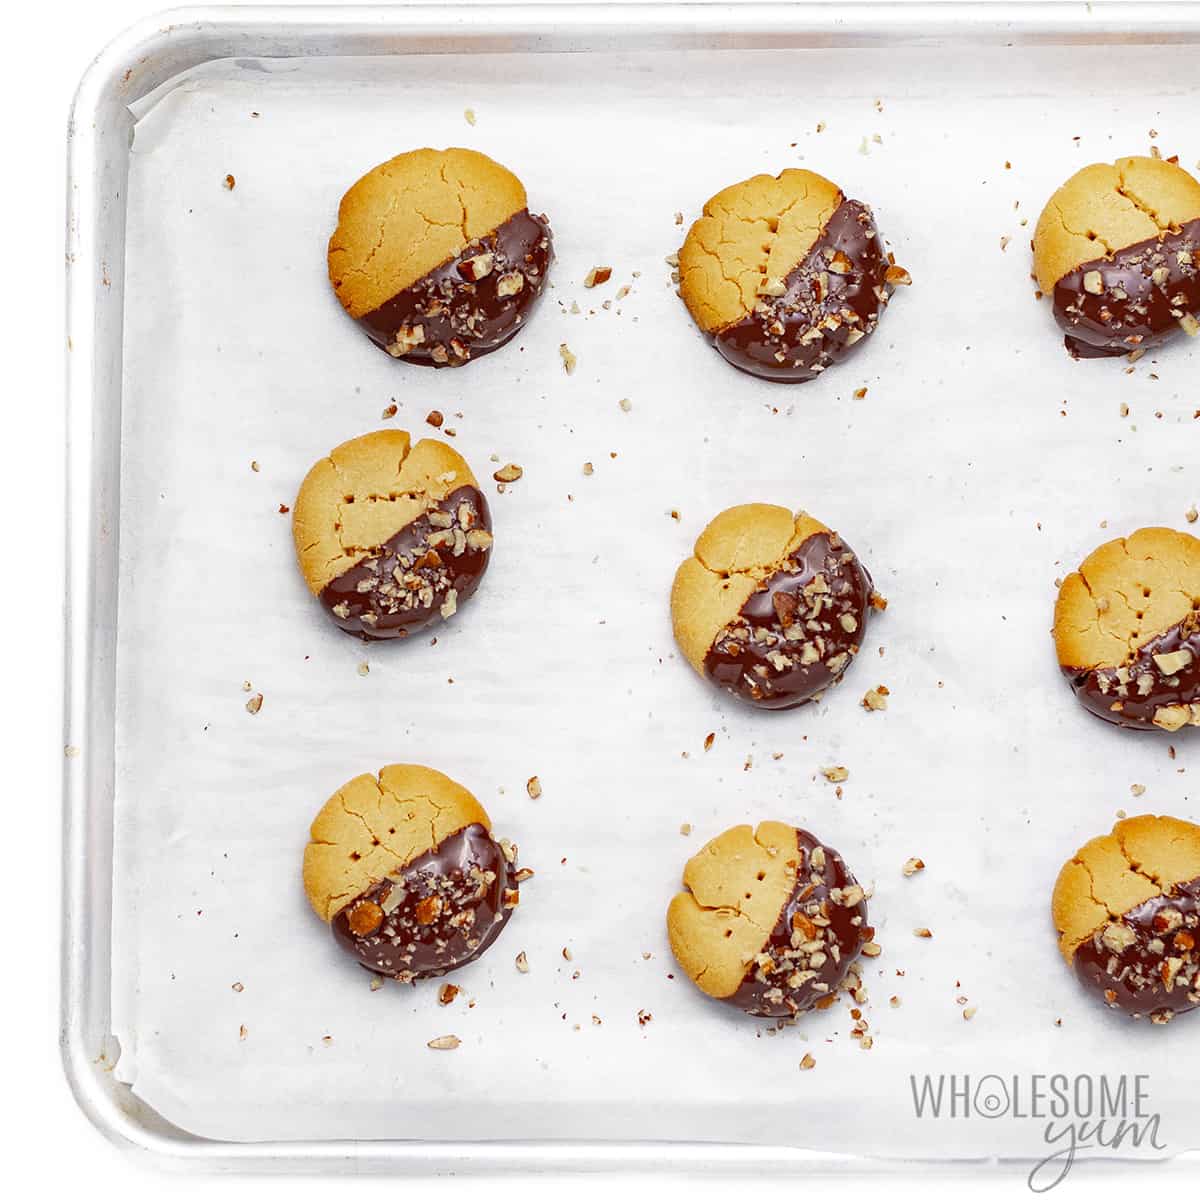 Coconut flour shortbread cookies on baking sheet with nuts sprinkled on top.